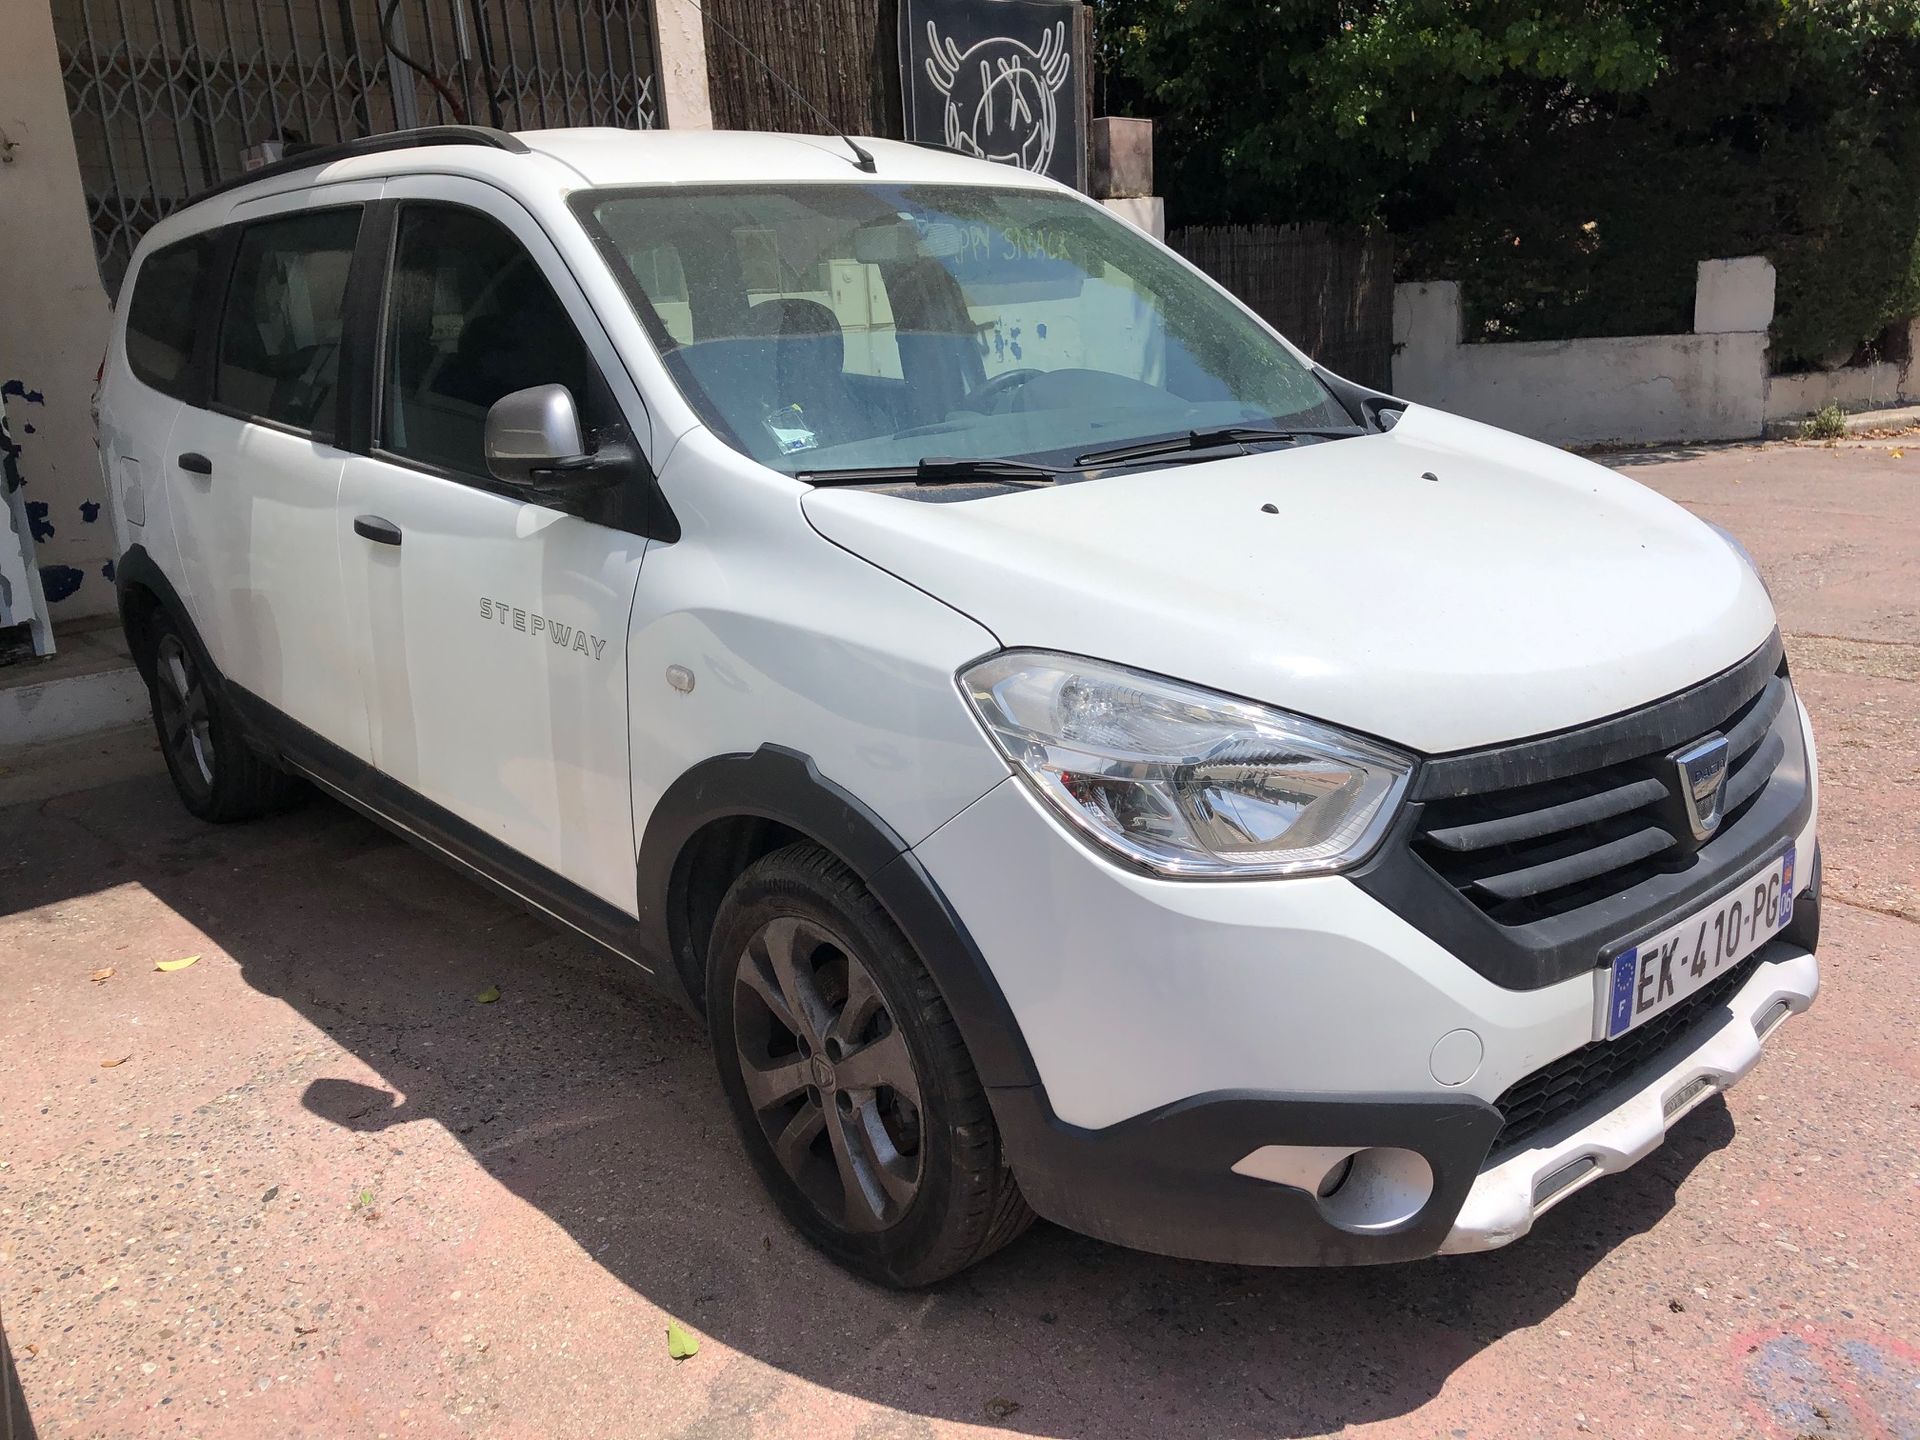 Null 1 DACIA LODGY 1.2 TCE 115 7 SEATS REGISTERED EK-410-PG FROM 07/03/2017 6HP &hellip;